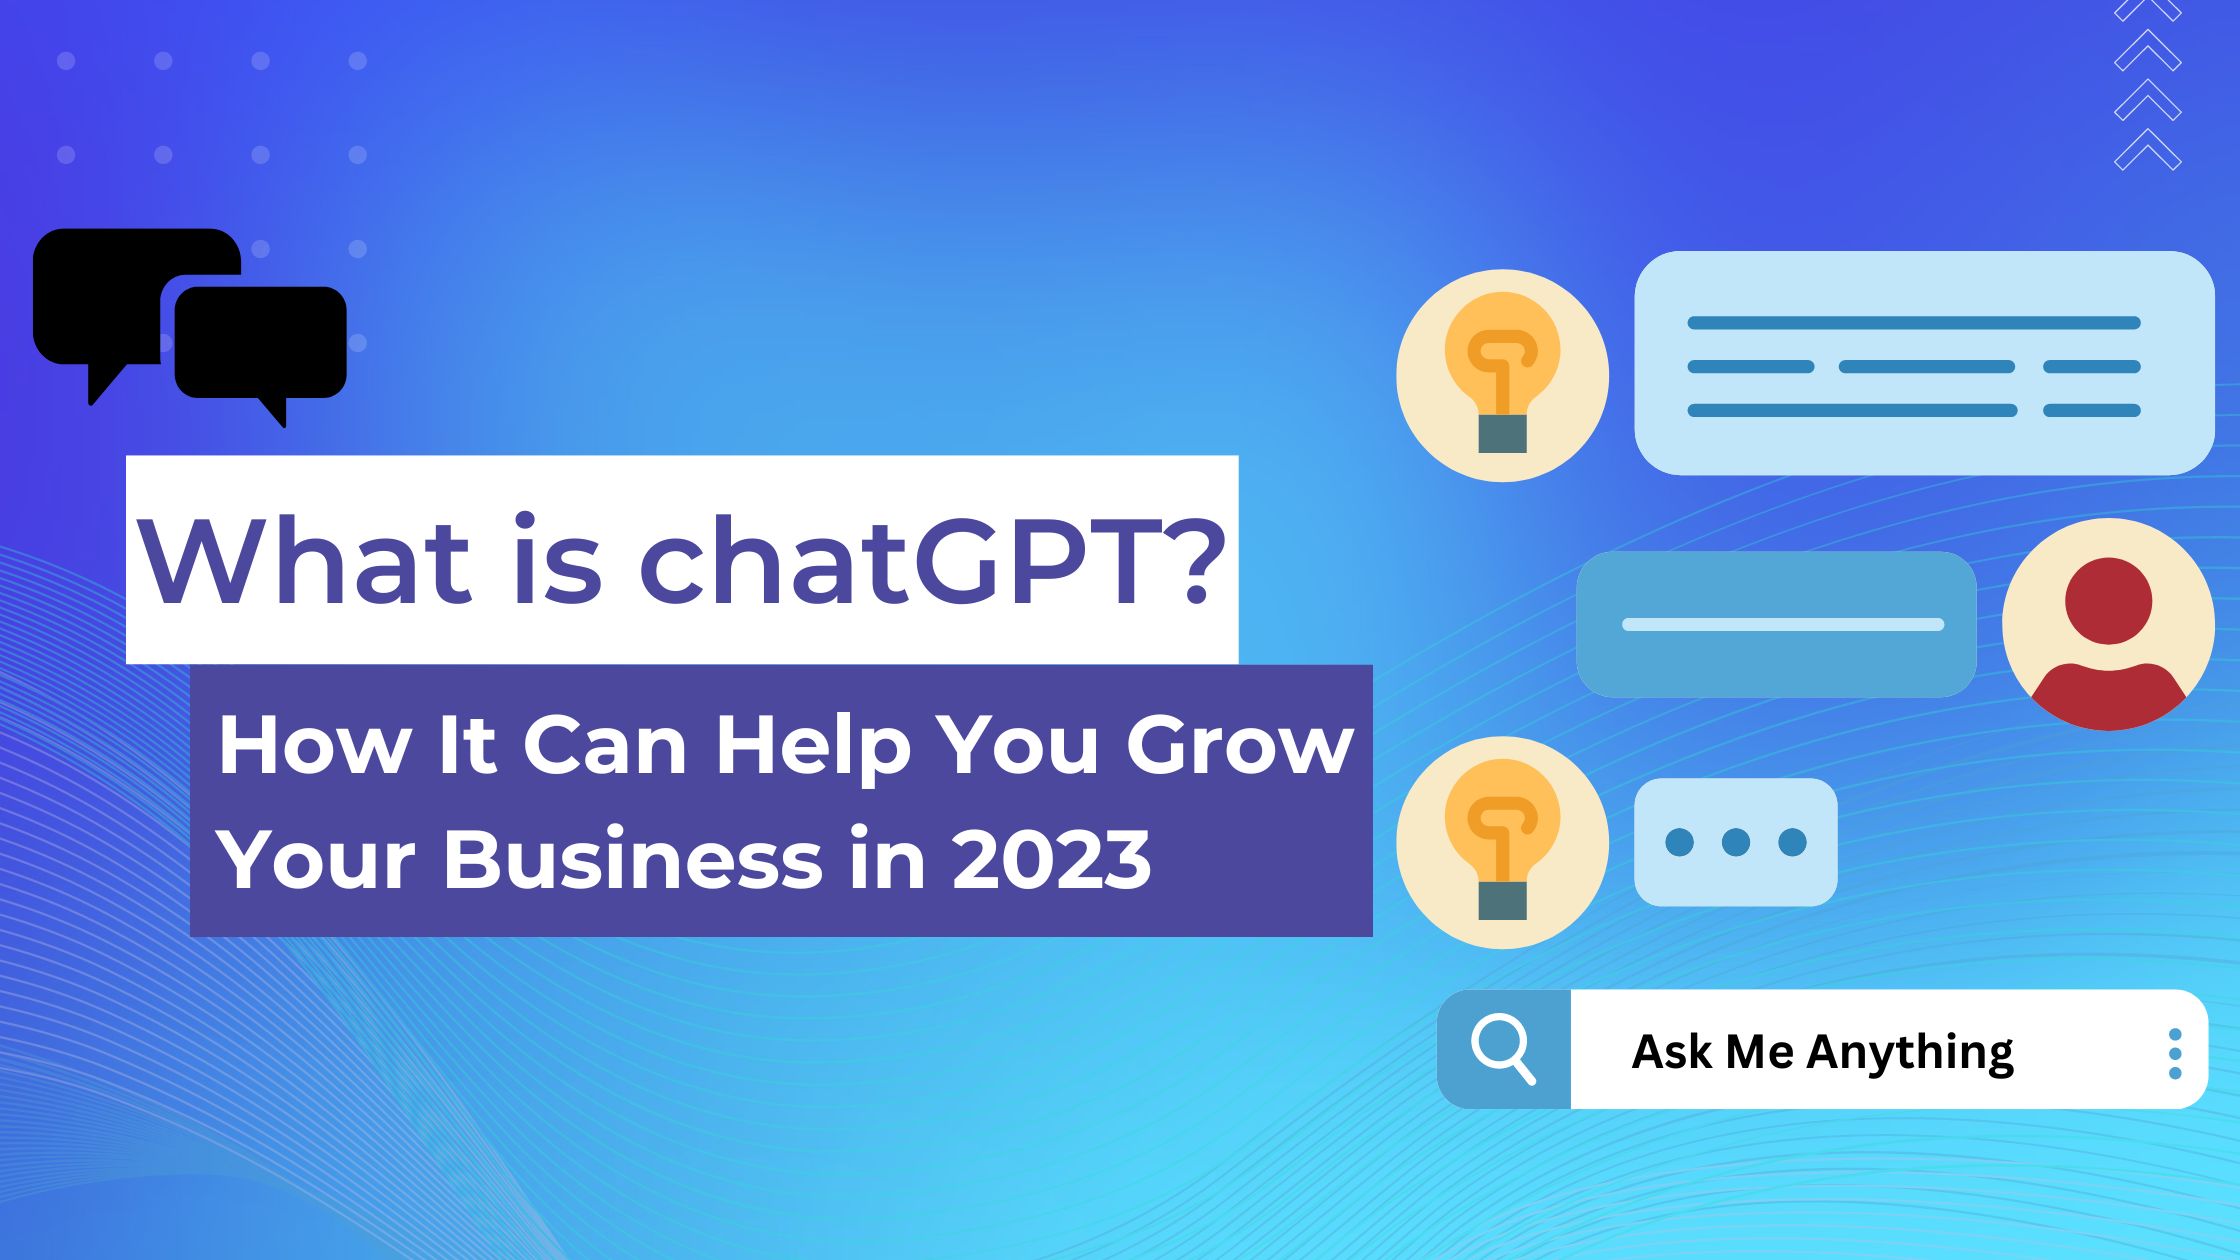 What is chatGPT ? and How It Can Help You Grow Your Business in 2023